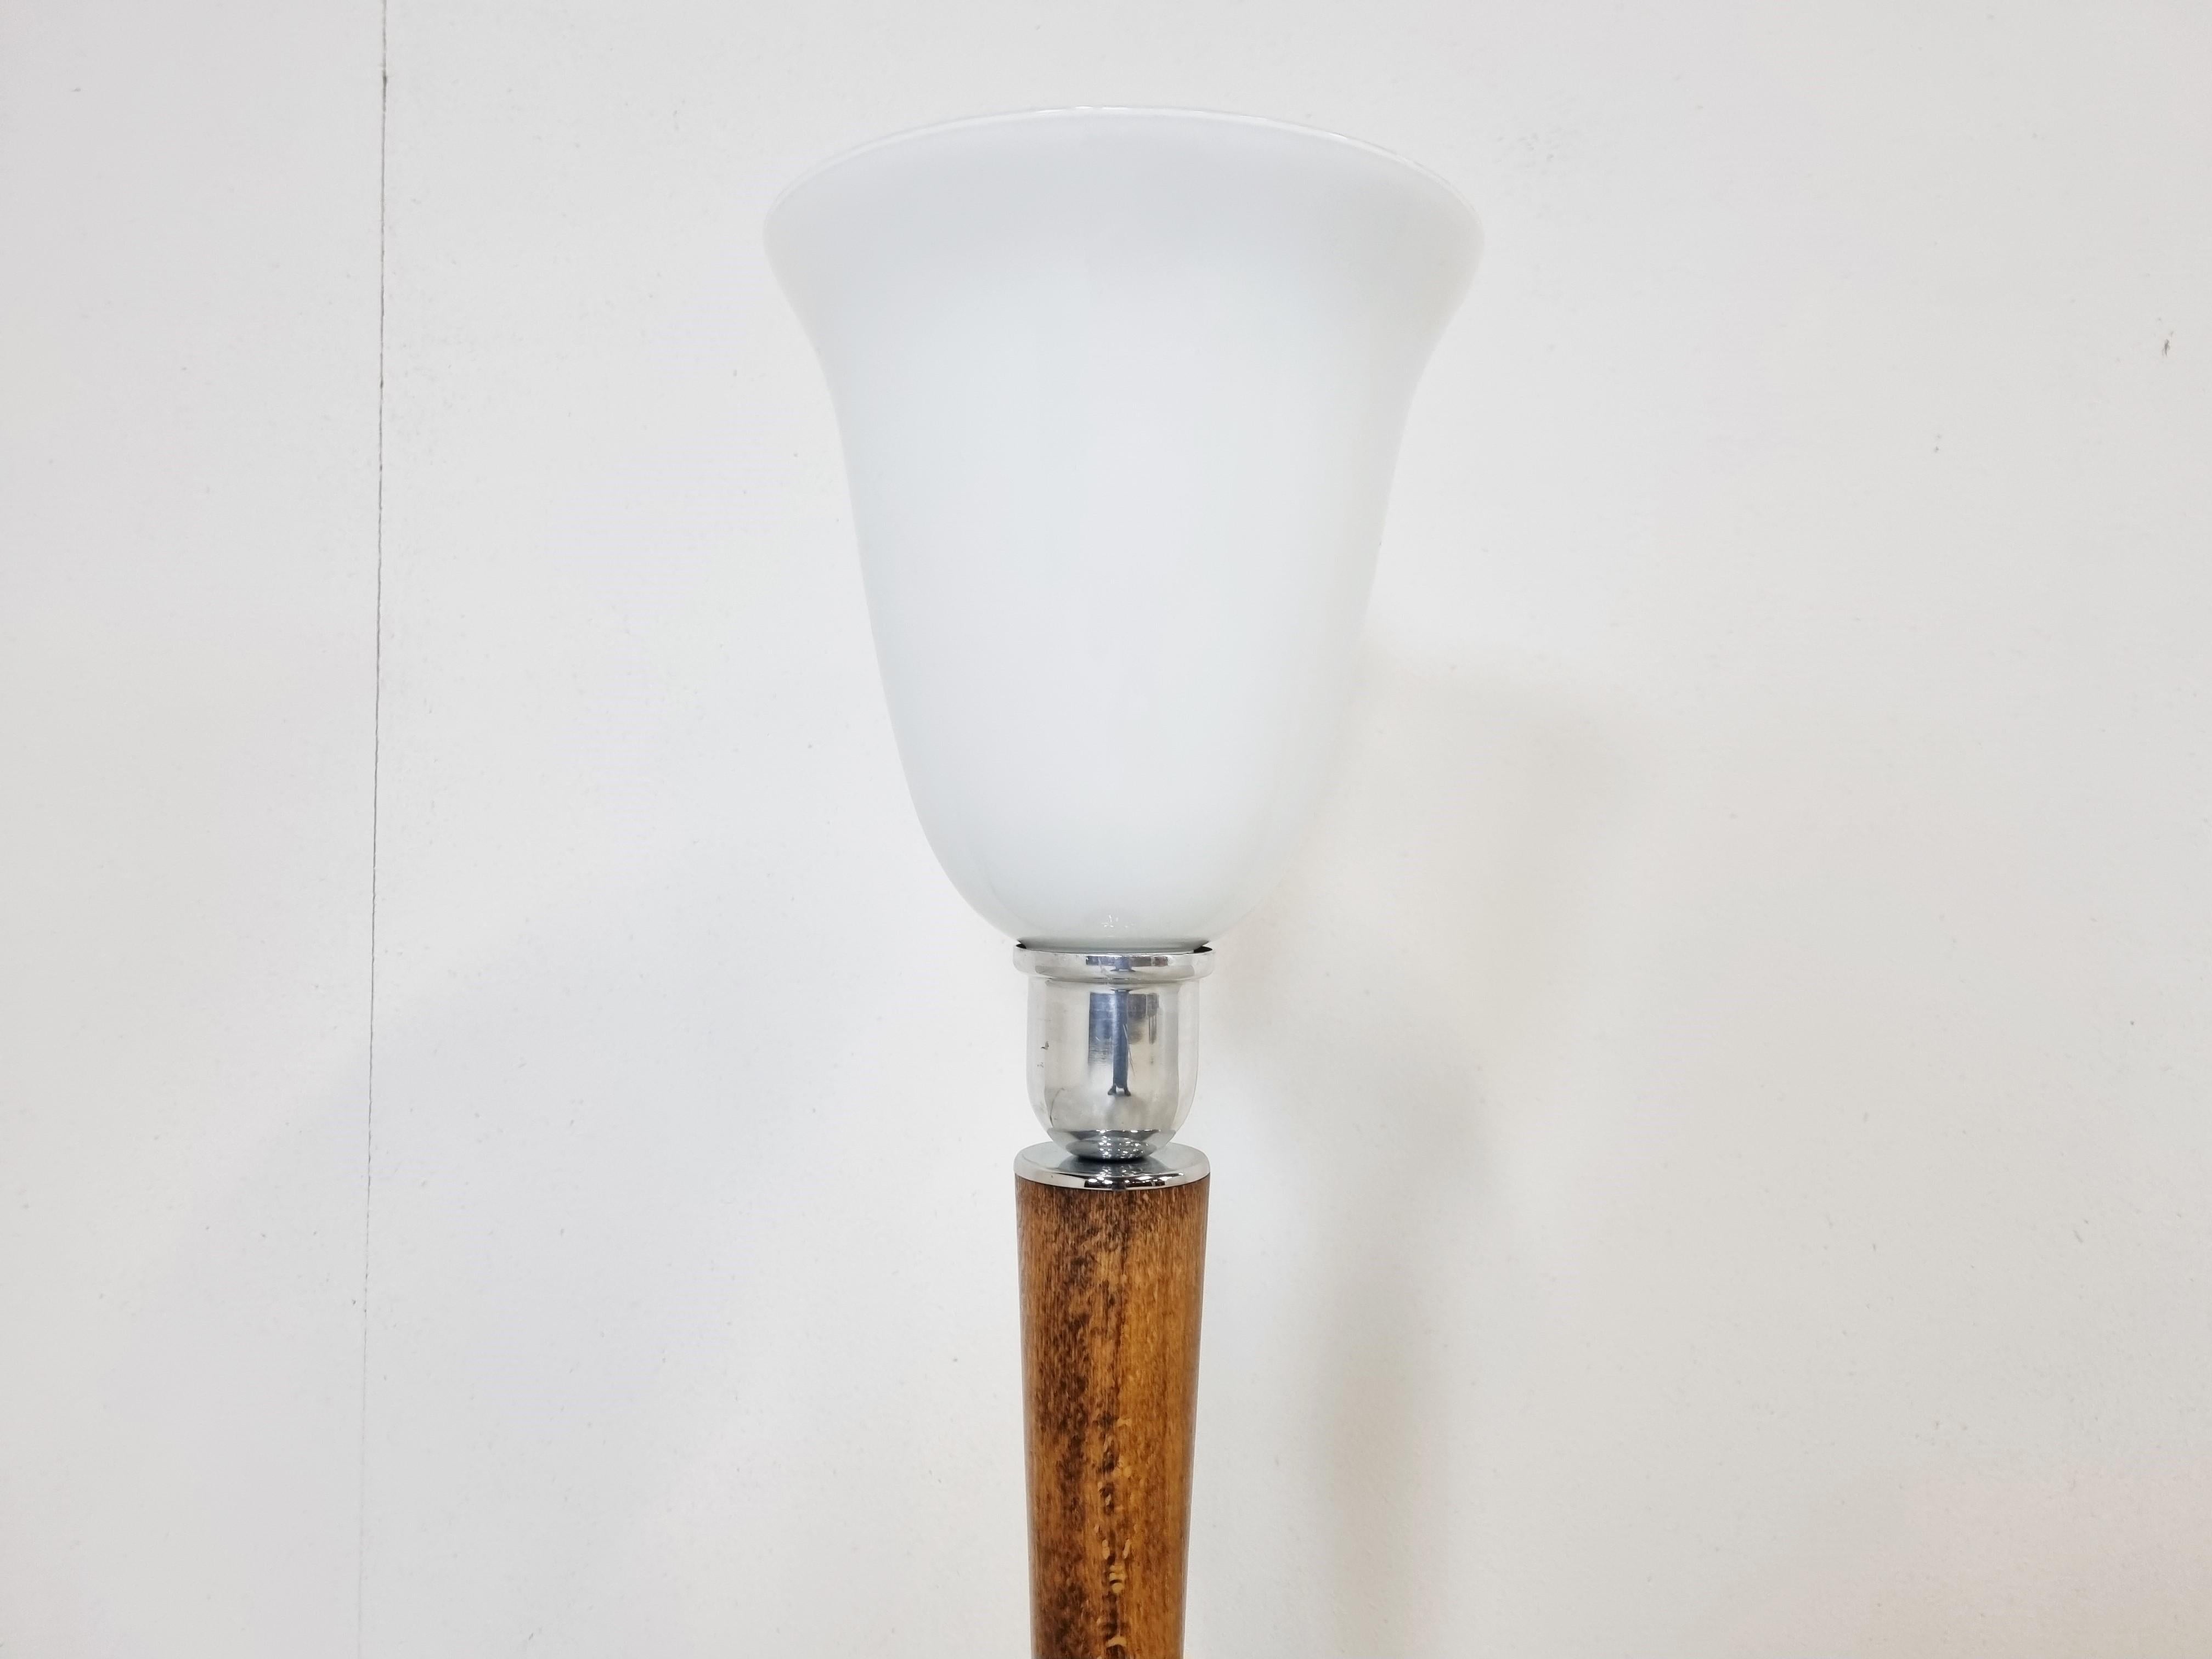 Elegant uplighter desk or table lamp by Mazda with original tulip shaped opaline glass.

Made from wood and nikkel plated metal.

Good original condition.

Tested and ready for use 

Dimensions: 
height: 64cm/25.19